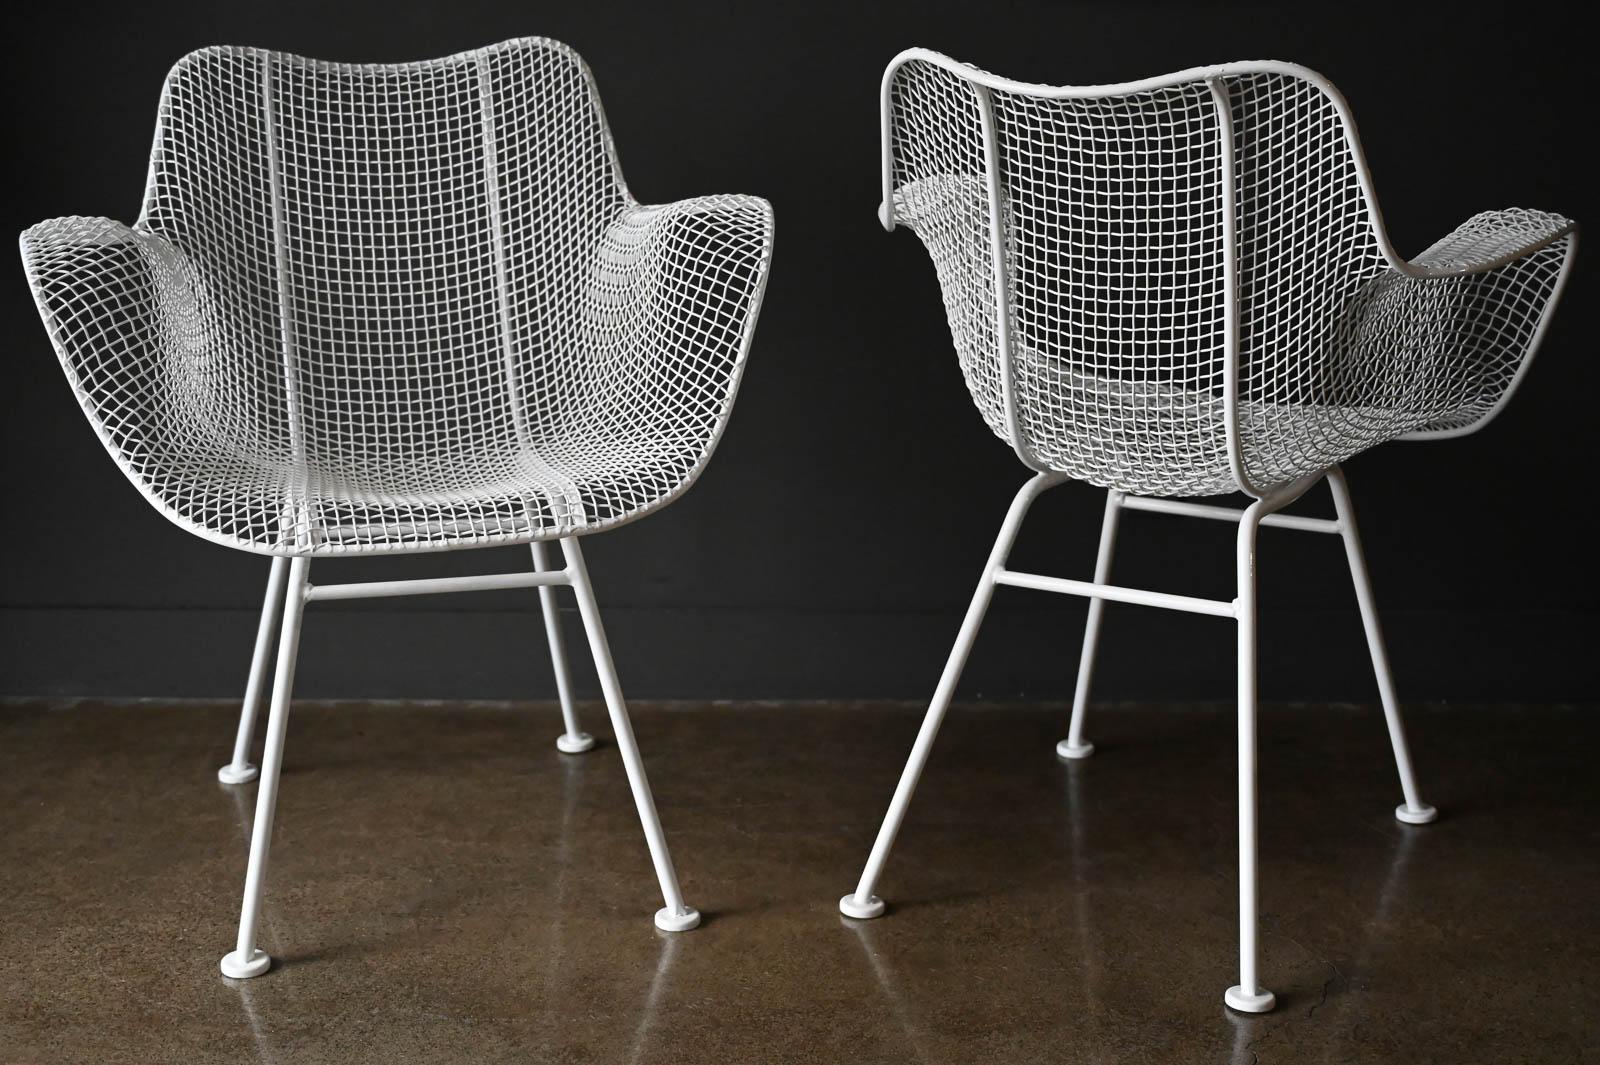 Pair of Russell Woodard Sculptura Outdoor Chairs, circa 1950. Professionally restored with new white gloss powder coat. All welds are intact with no breaks. Truly a beautiful, sculpted set of outdoor chairs.

